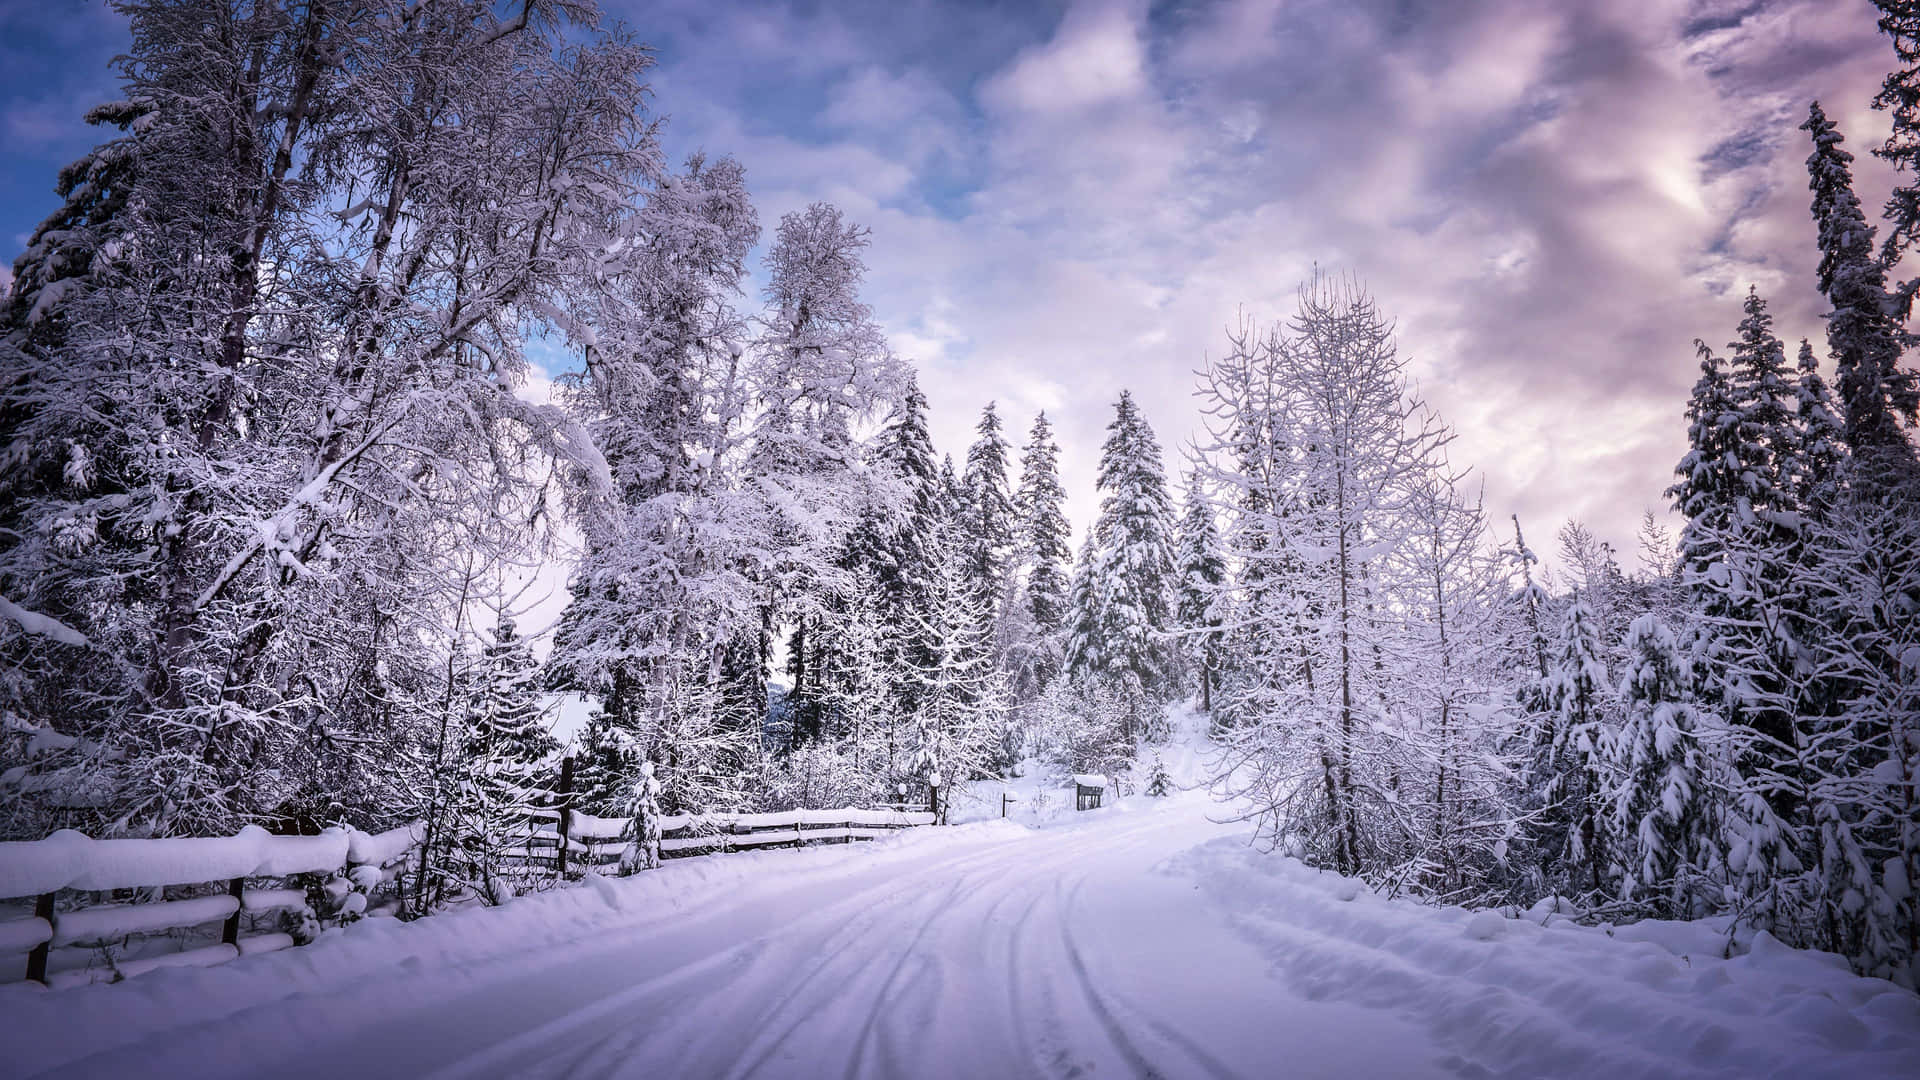 A Snow Covered Road In The Forest